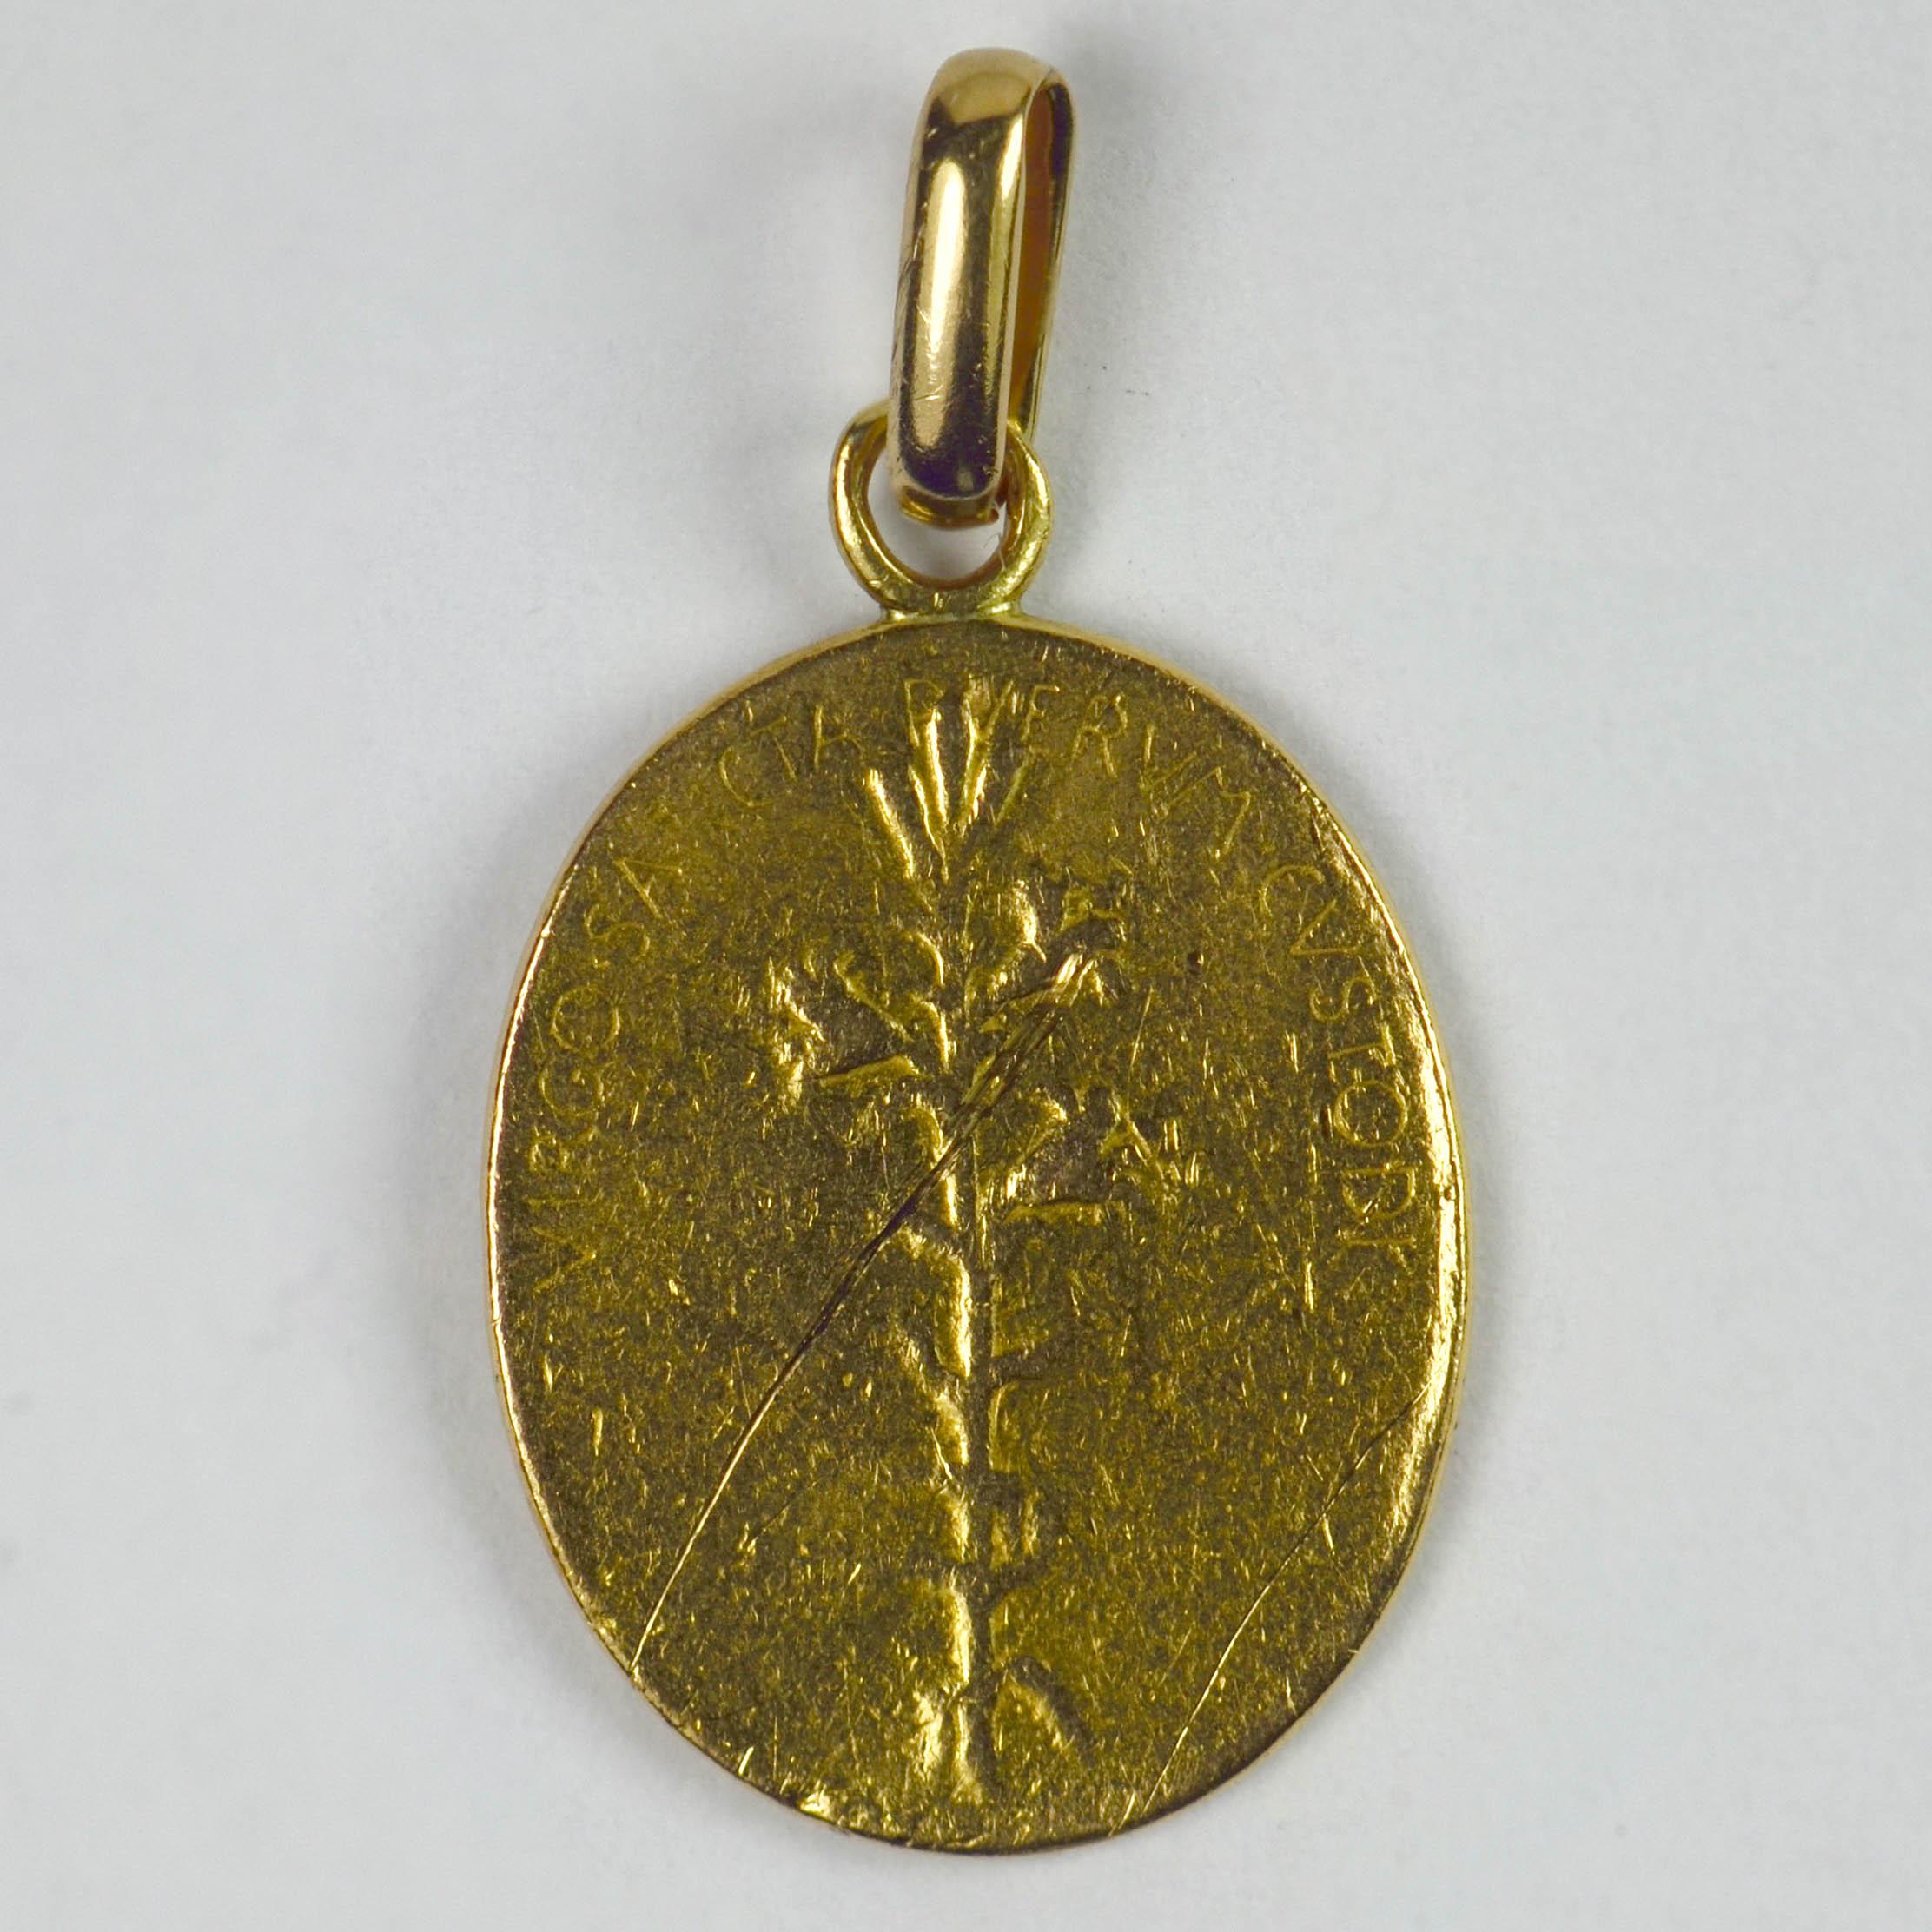 A French 22 karat (22K) yellow gold charm pendant designed as an oval disc with a carved relief of the Madonna and Child, signed O. Roty. The reverse depicting a branch of lilies with the Latin motto 'VIRGO SANCTA PUERUM CUSTODI' (Holy Virgin